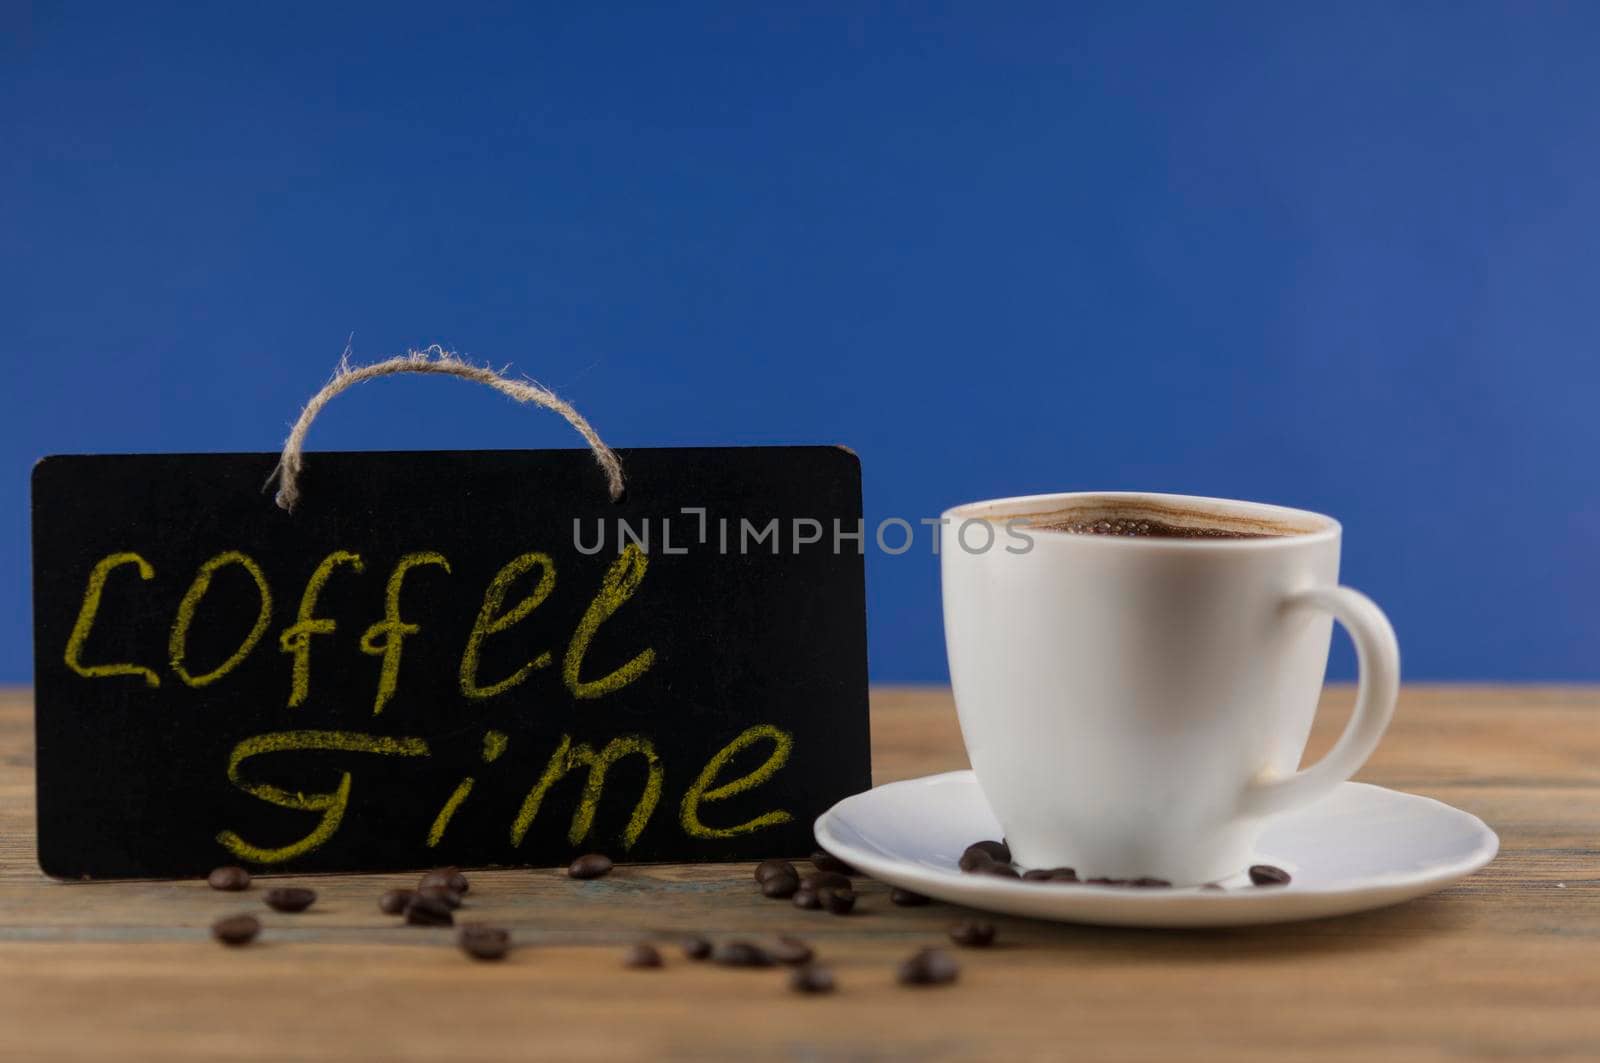 A cup of coffee and blackboard with inscription "coffee time". Coffee break, morning awakening concept.